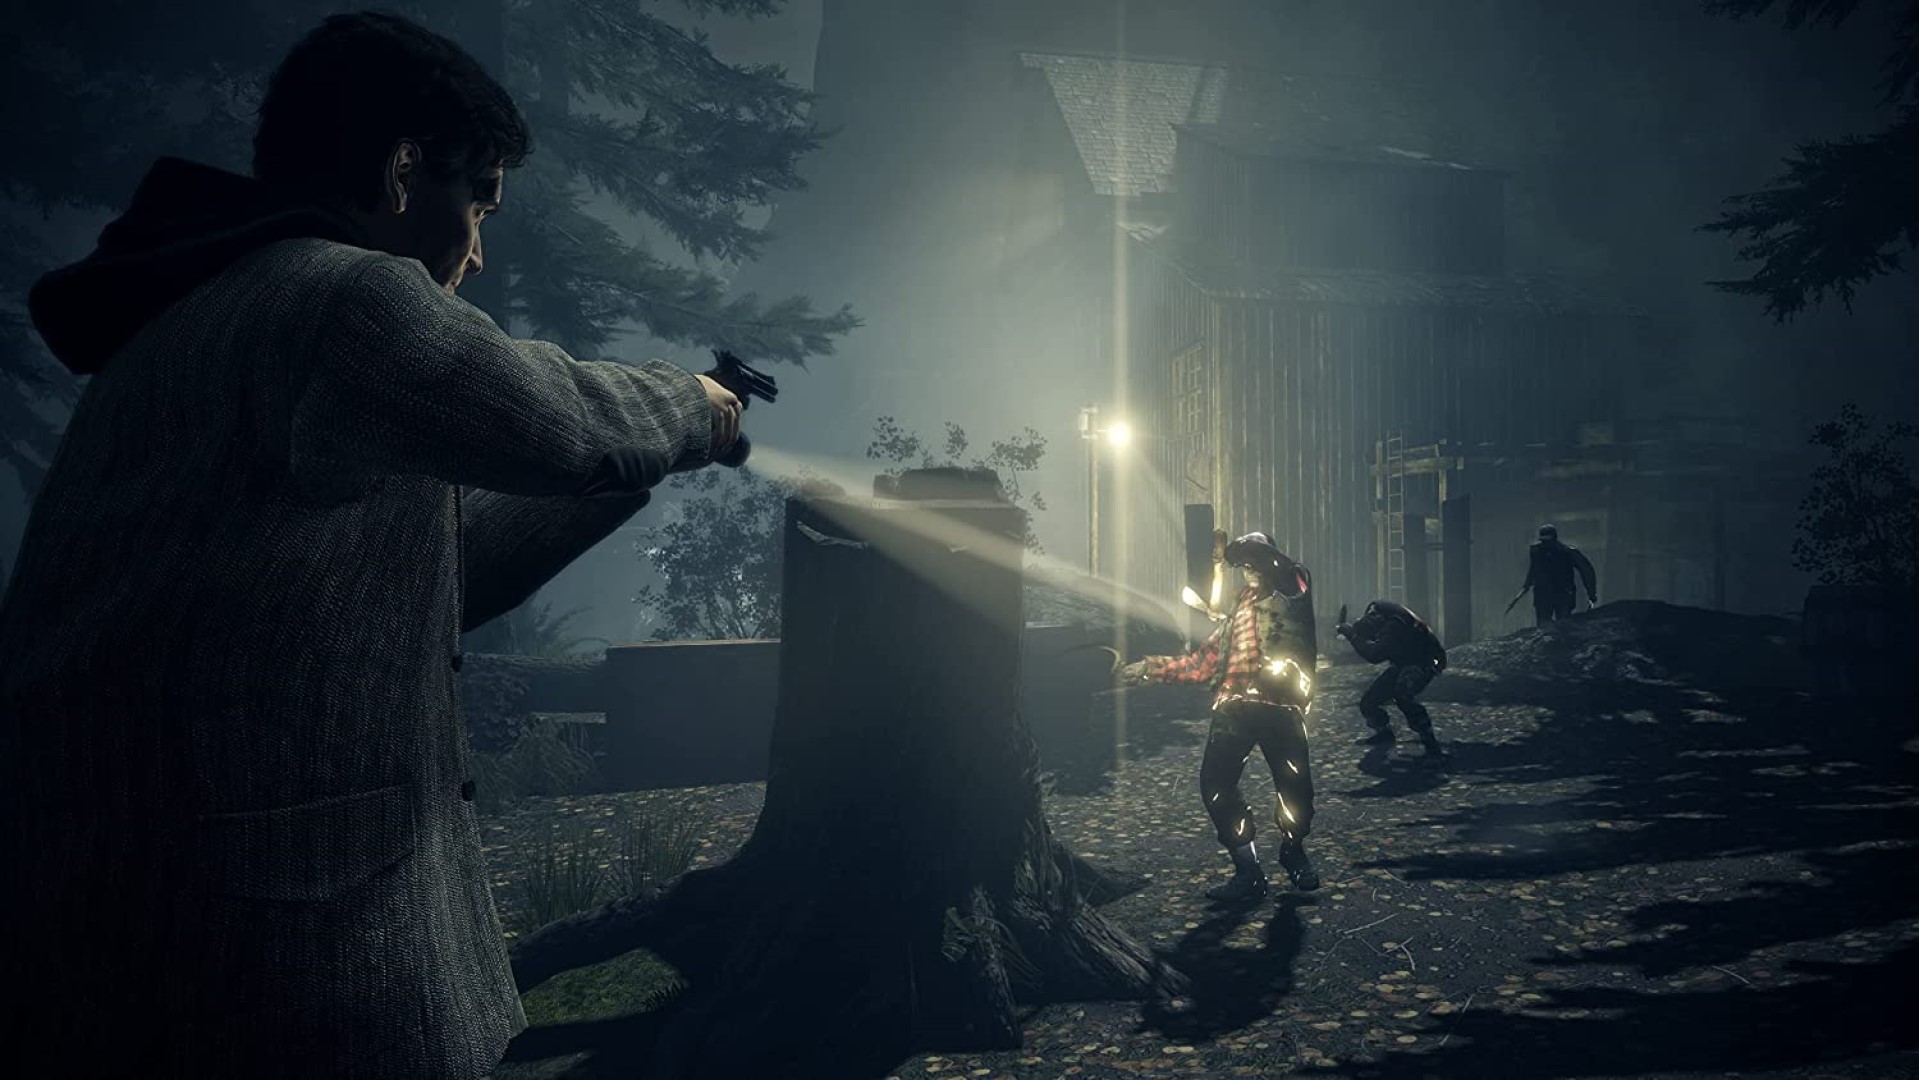 Alan Wake 2 Will be Revealed at The Game Awards